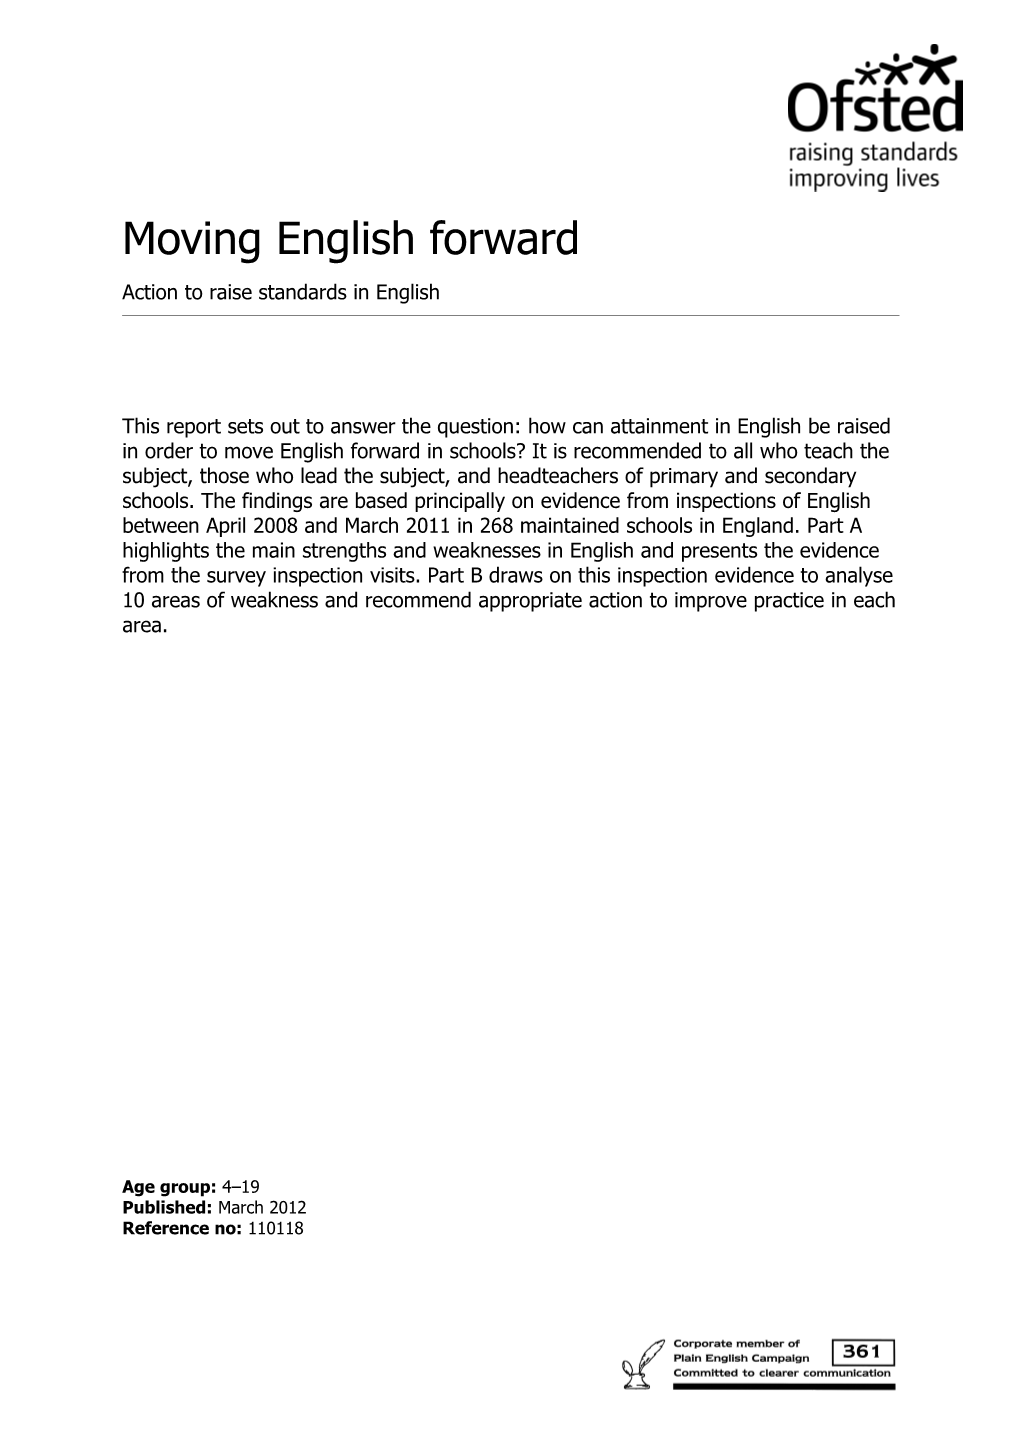 Action to Raise Standards in English